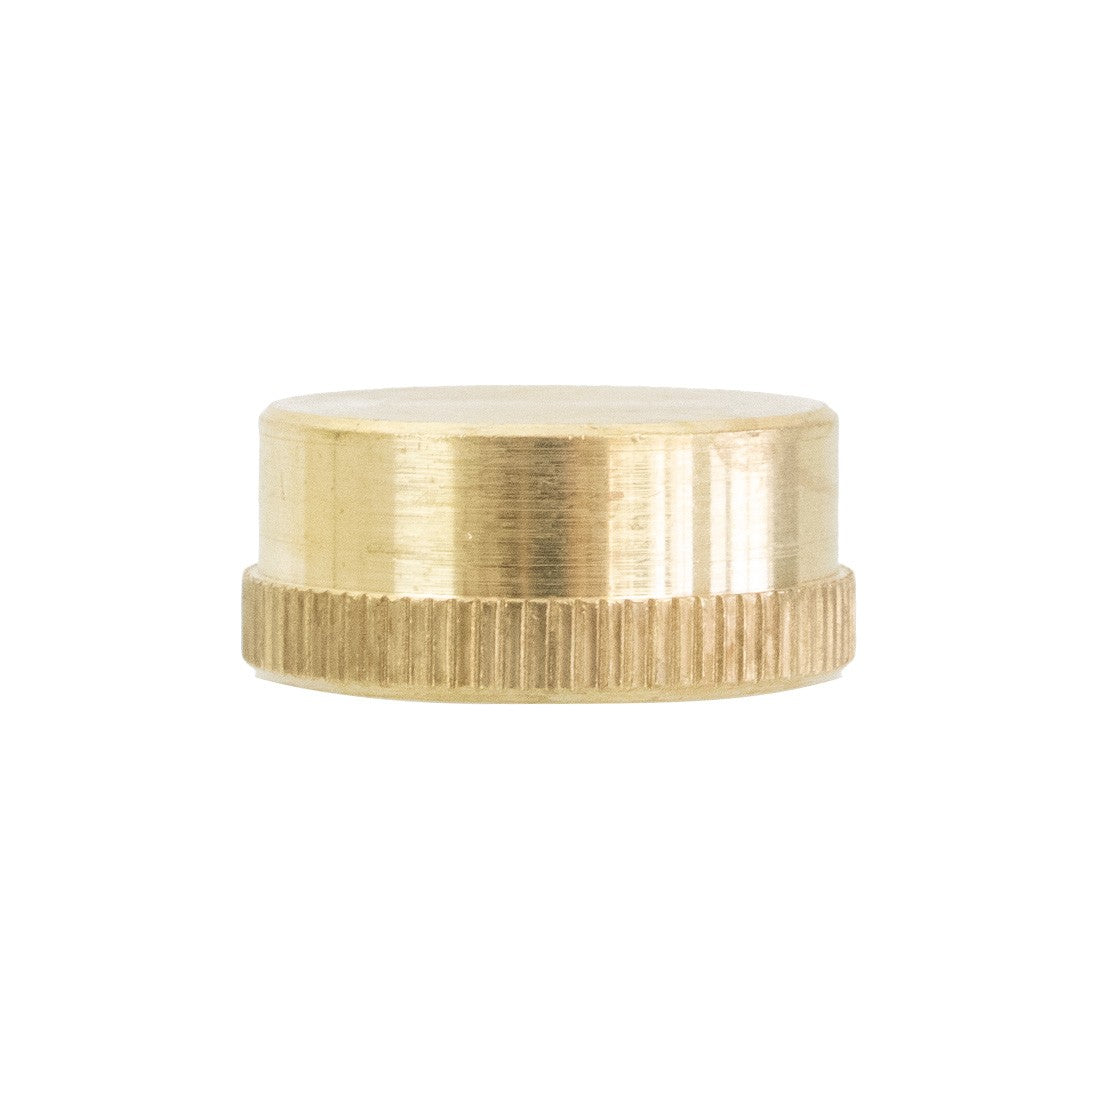 Garden Hose Cap with Washer - Brass - Inverted Front View